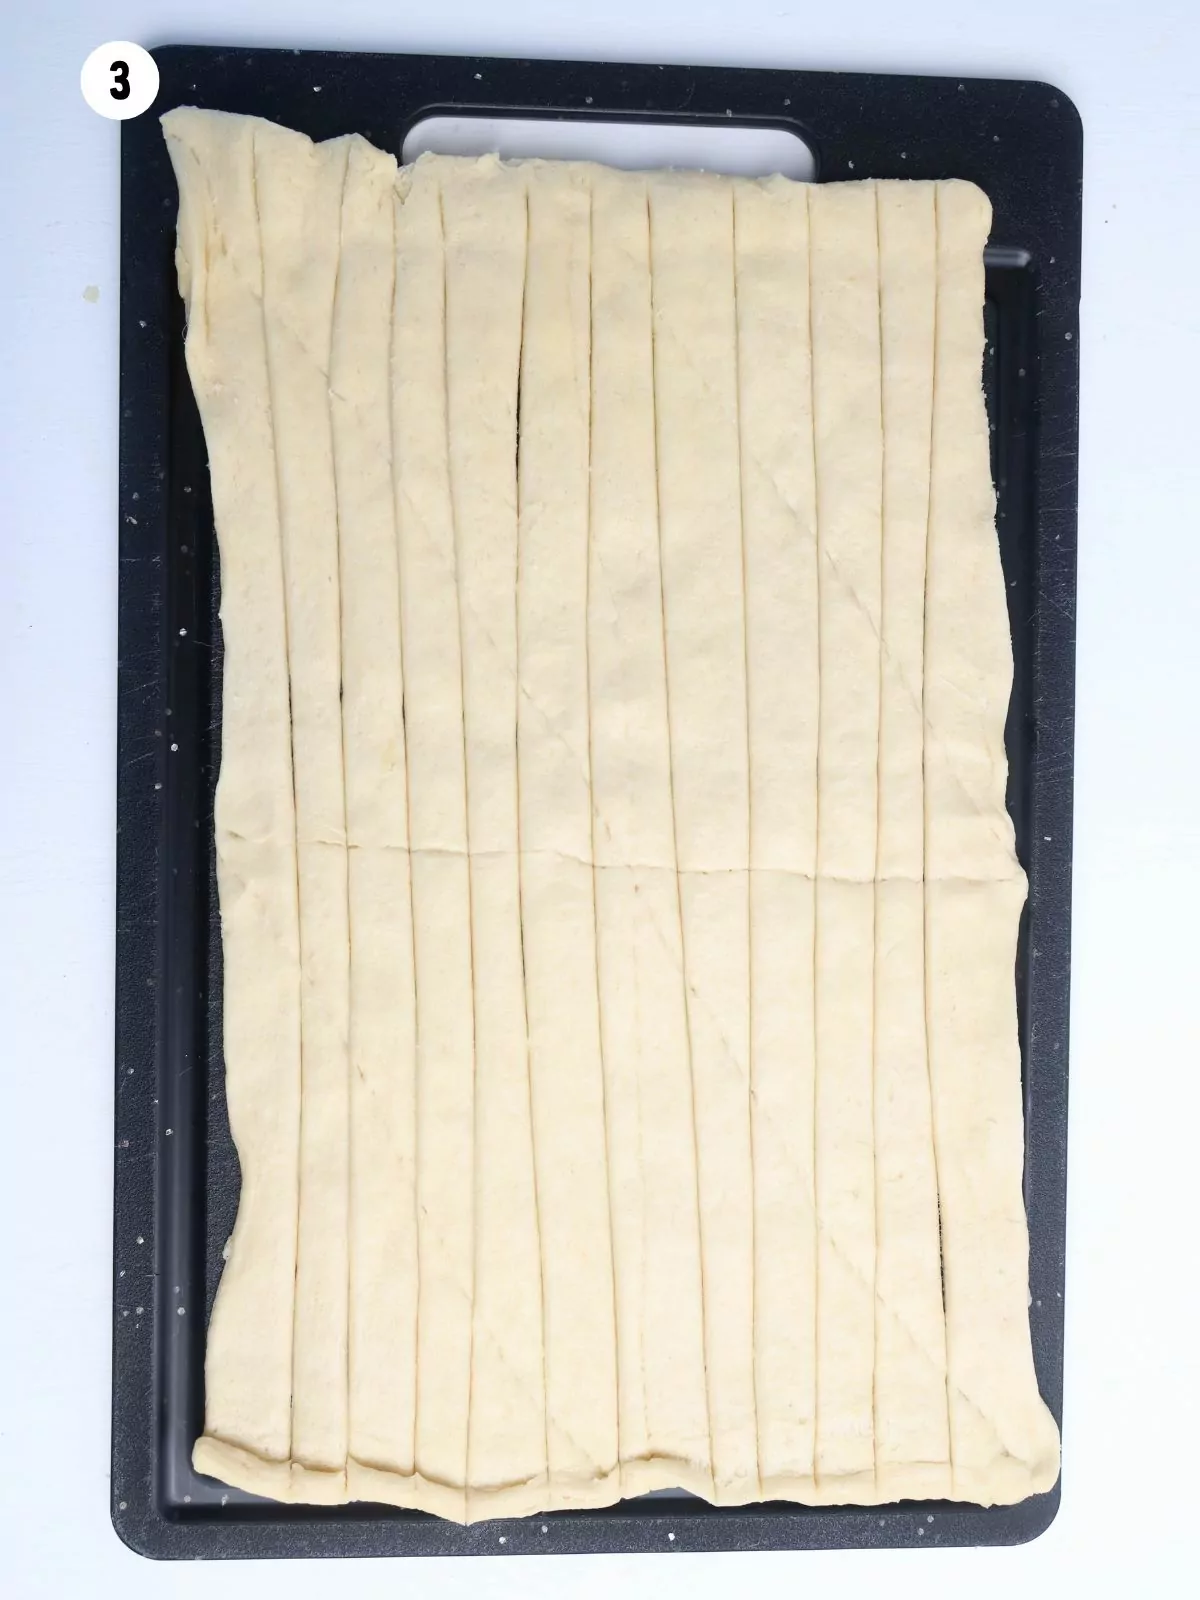 crescent roll dough sliced into strips.